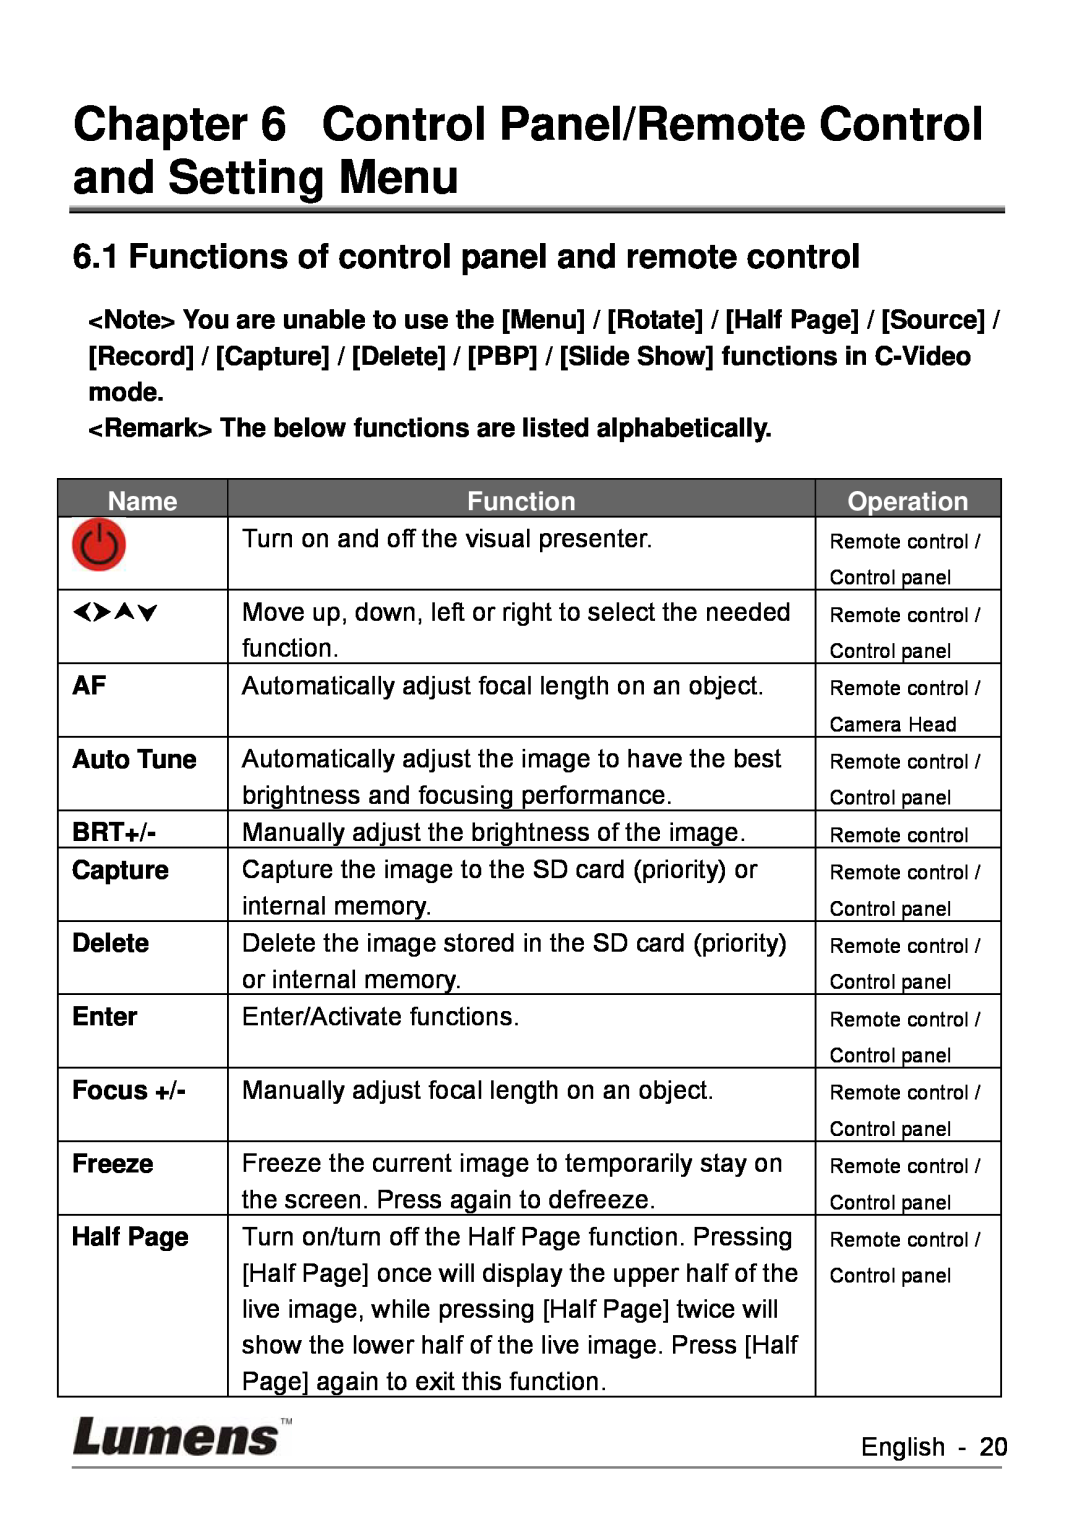 Lumens Technology DC260 Control Panel/Remote Control and Setting Menu, Functions of control panel and remote control, Brt+ 